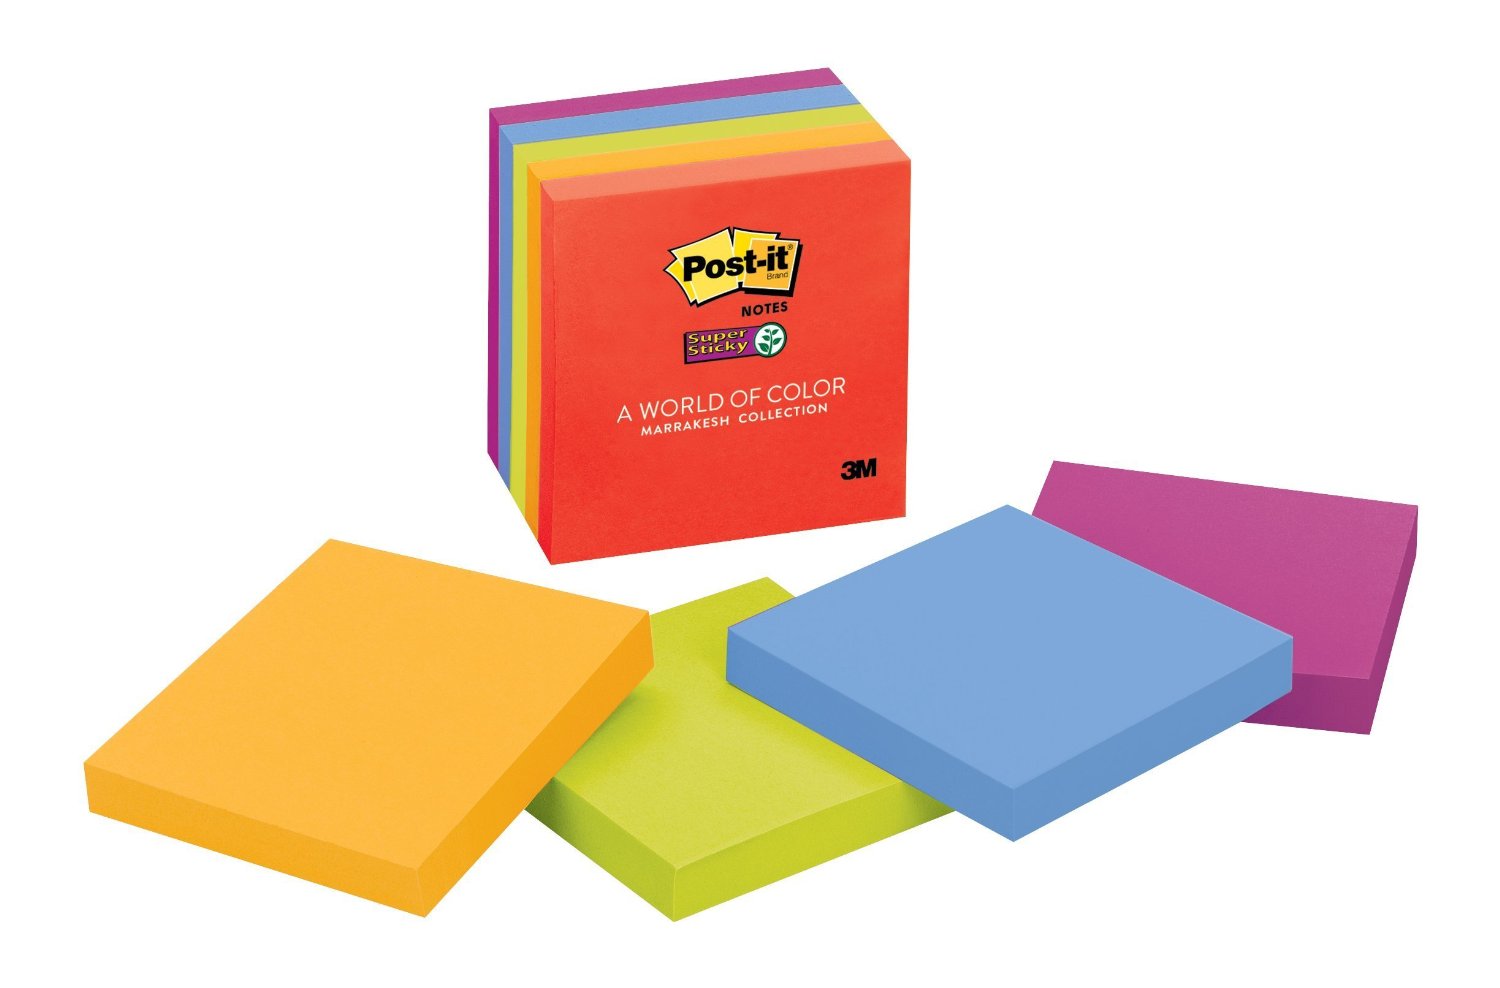 example of sticky_notes